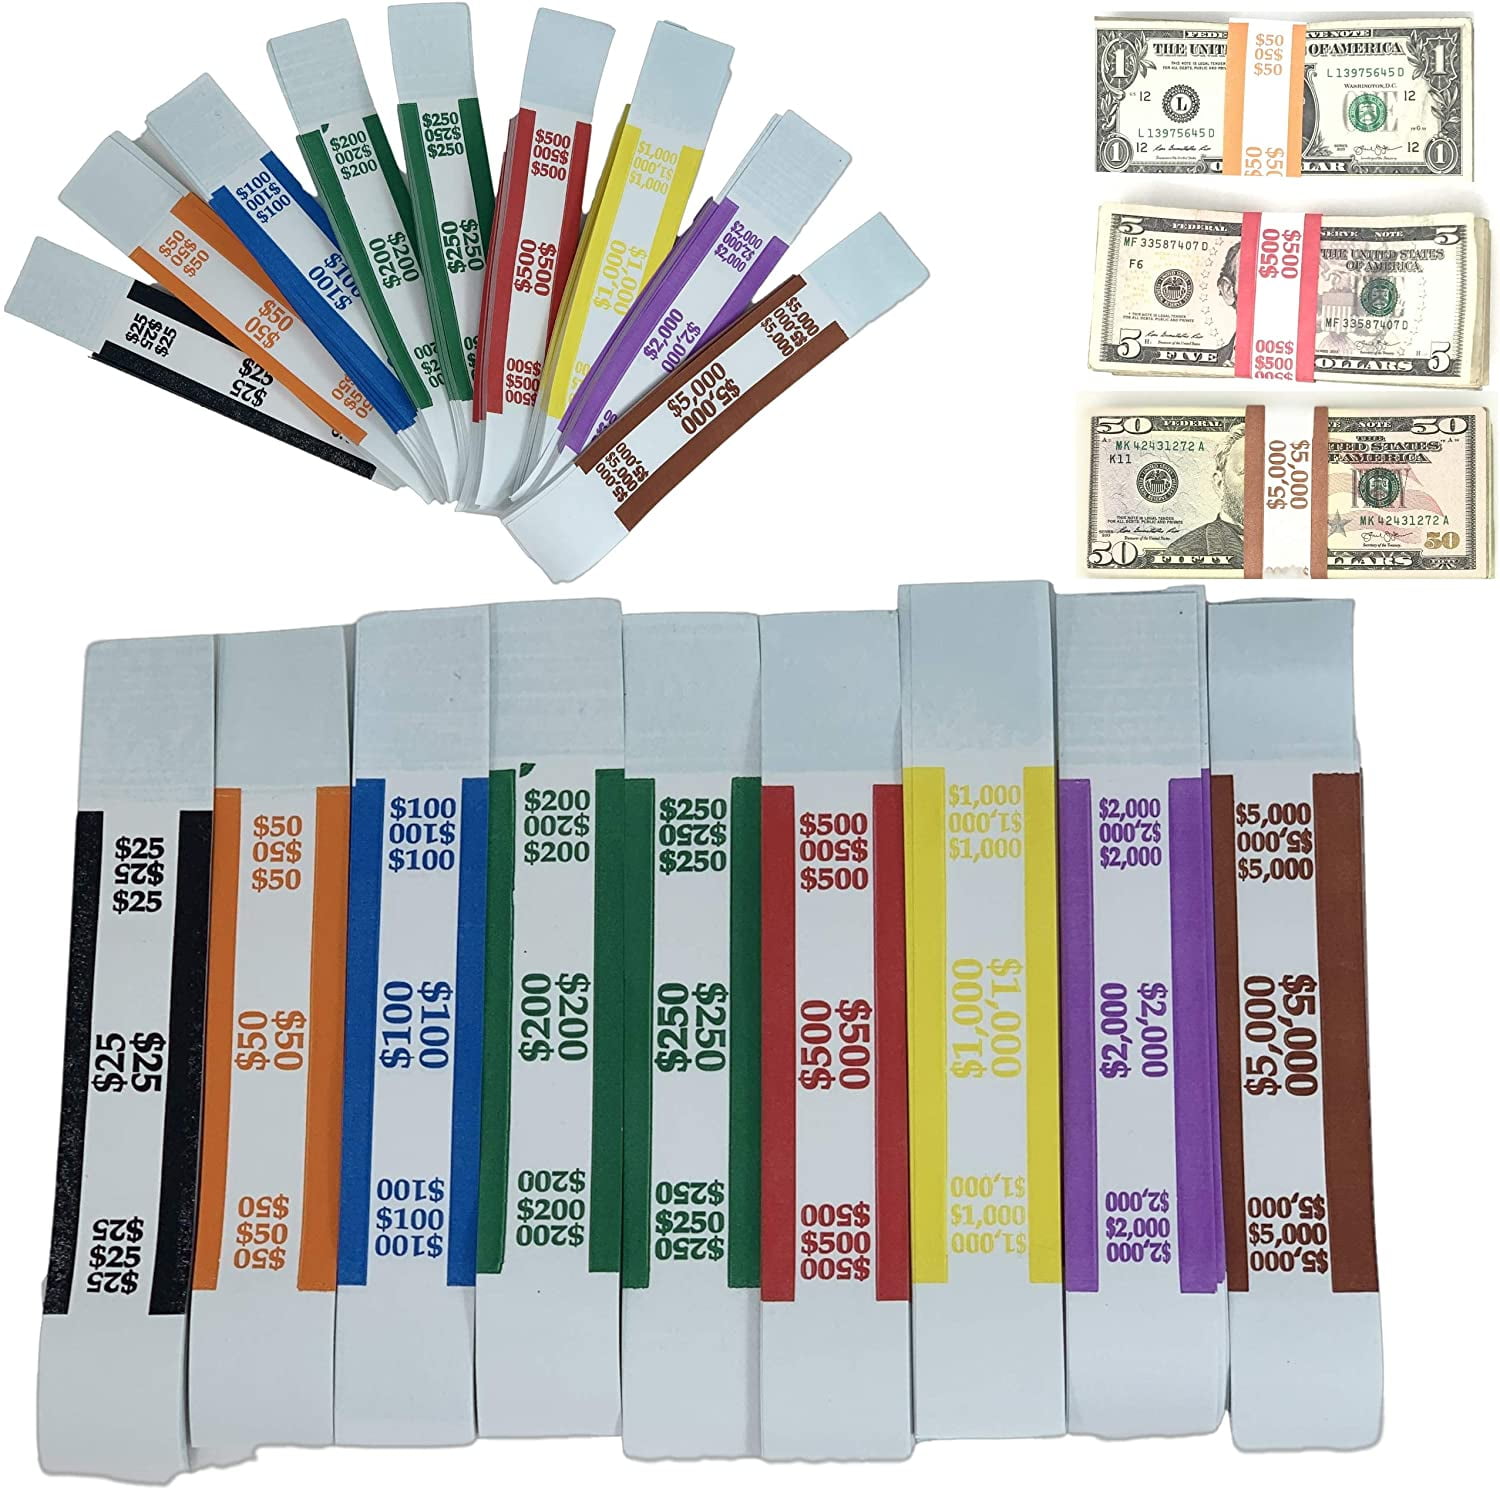 25 currency straps bands USA $1 bills 